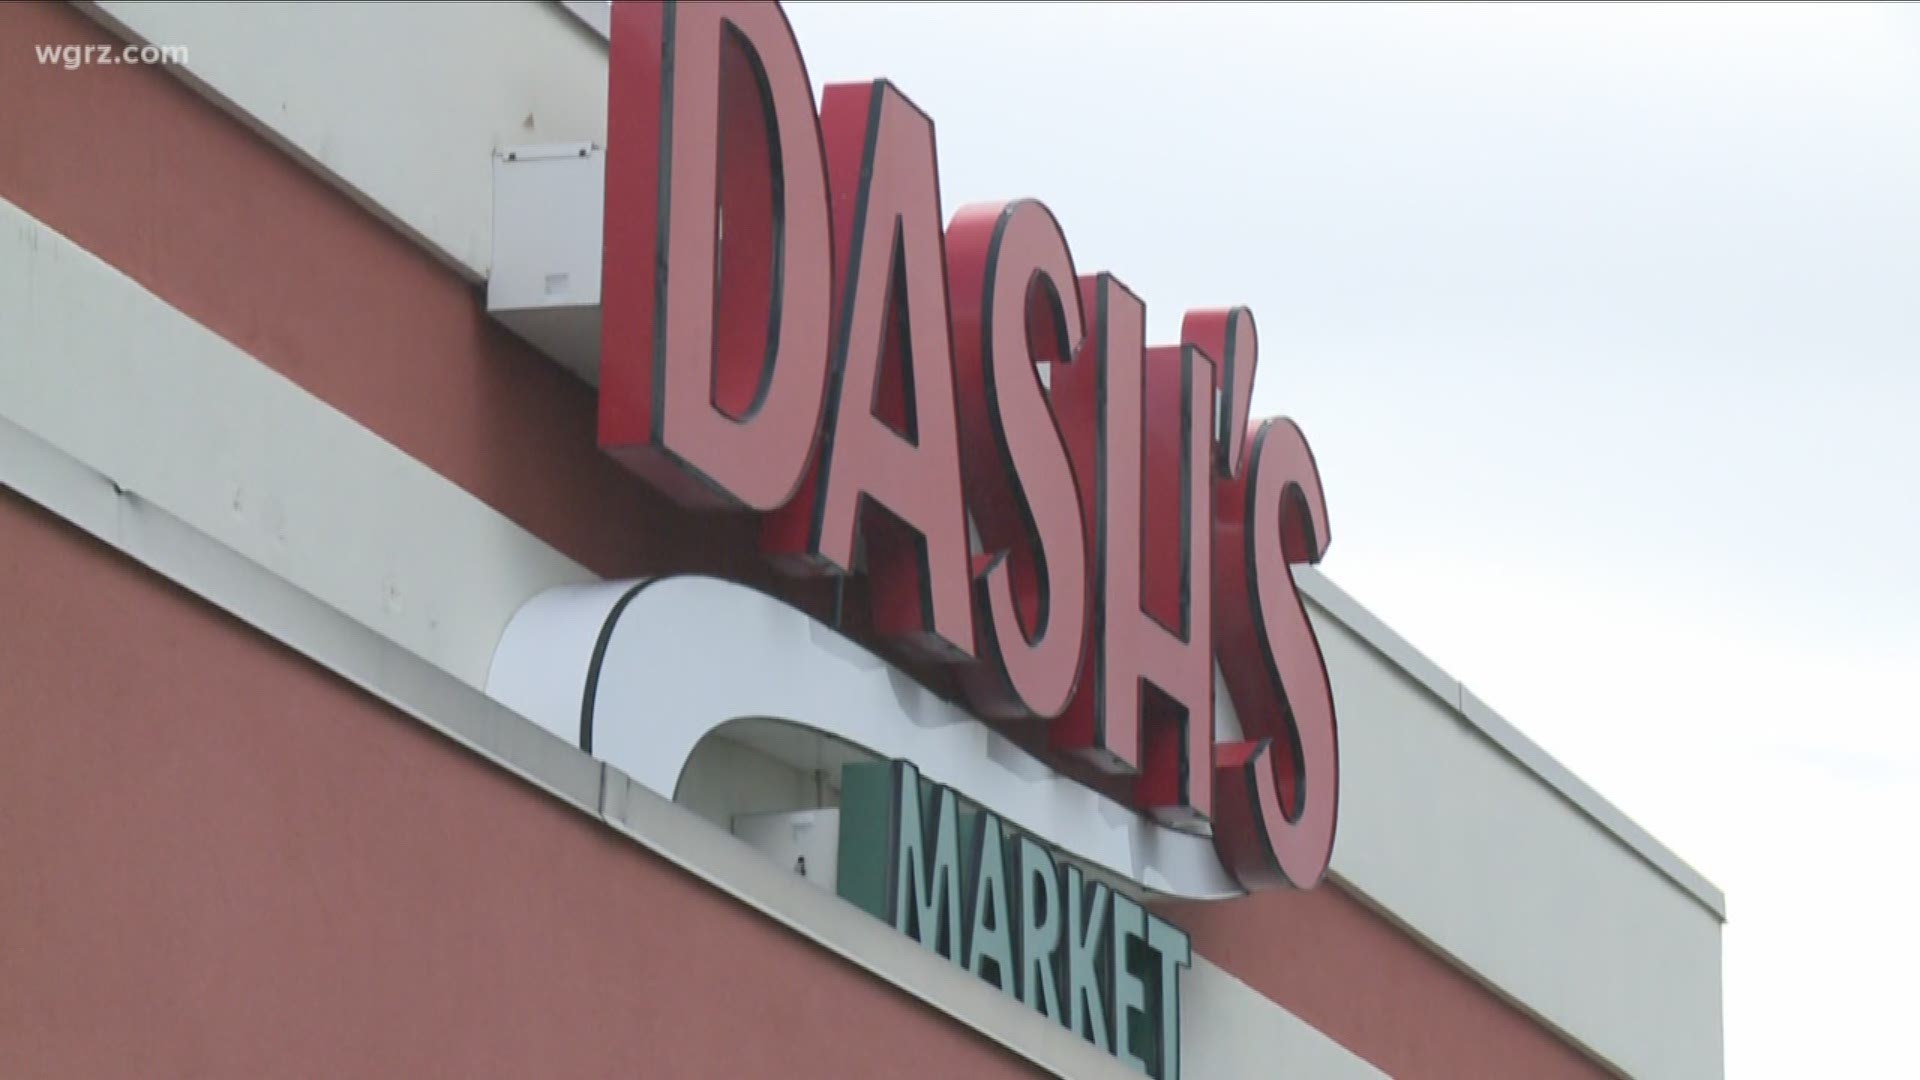 Workers will be transfer to other Dash's markets until the new store opens.